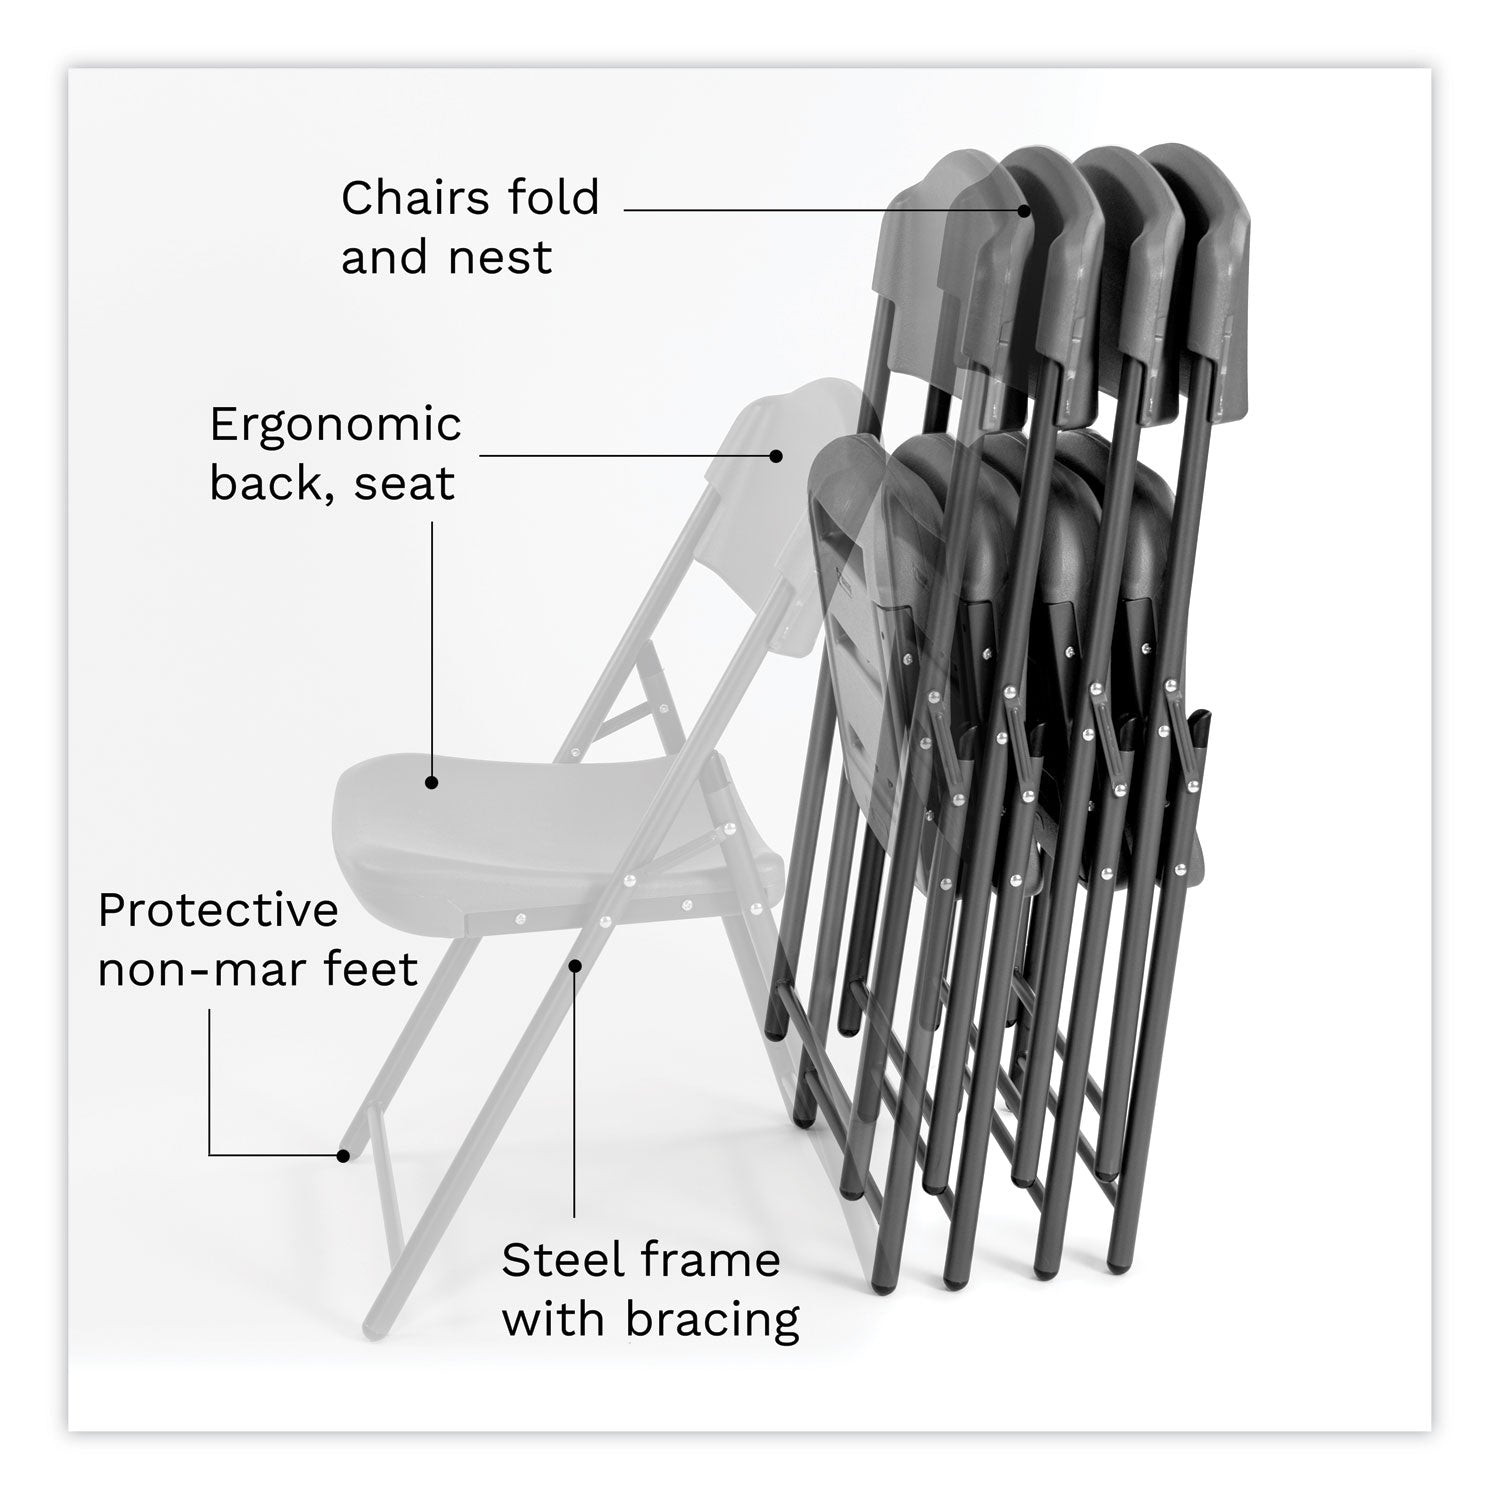 rough-n-ready-commercial-folding-chair-supports-up-to-350-lb-18-seat-height-charcoal-seat-back-charcoal-base-4-pack_ice64037 - 4